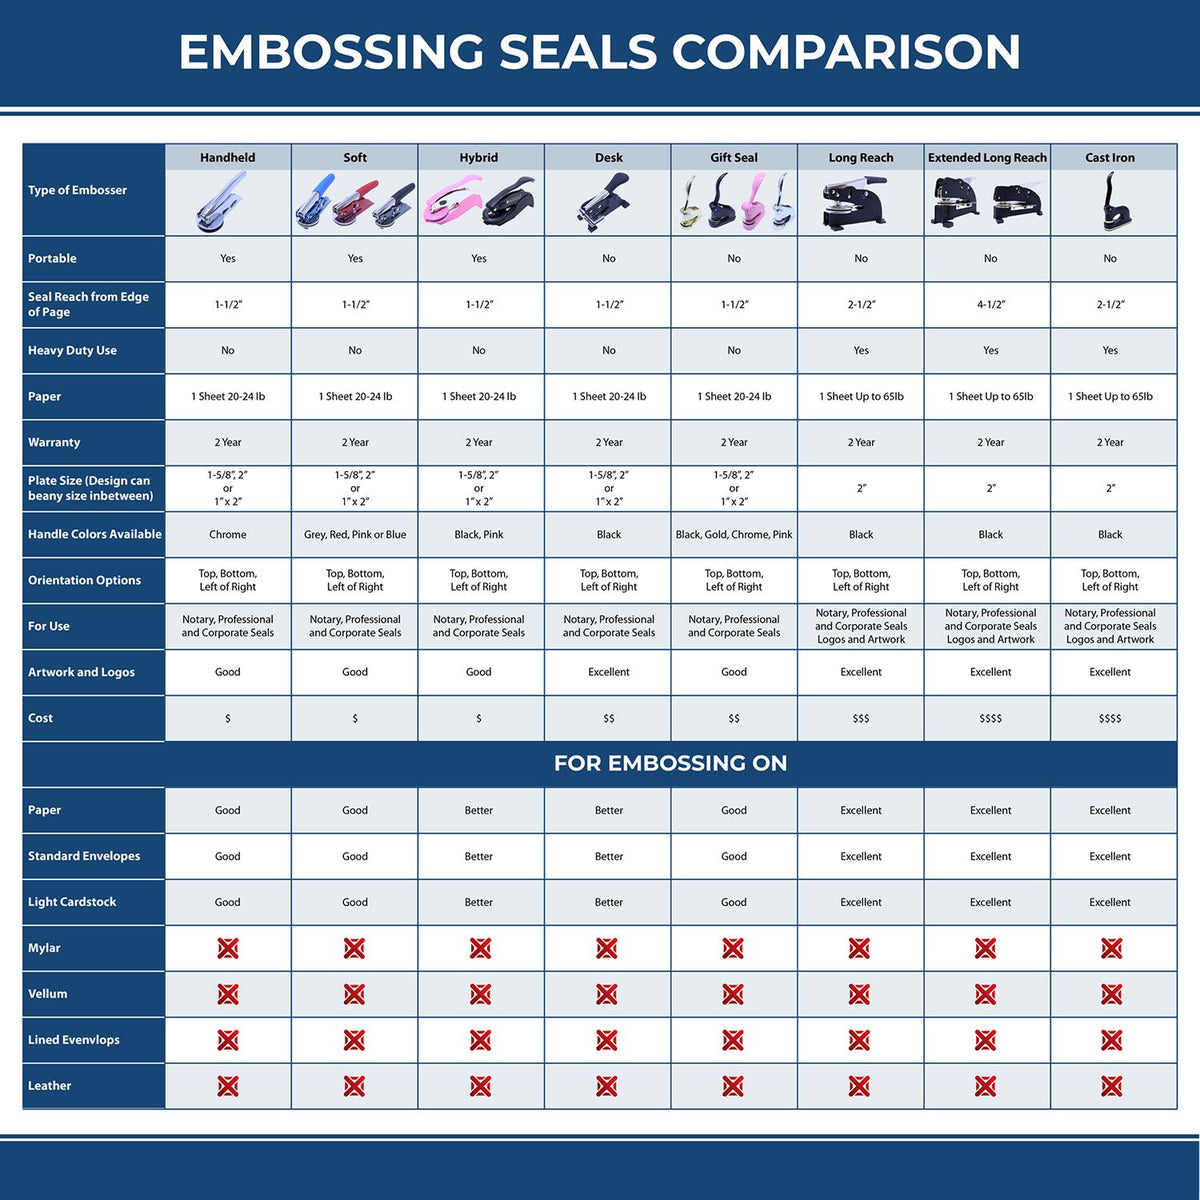 A comparison chart for the different types of mount models available for the Gift Nebraska Land Surveyor Seal